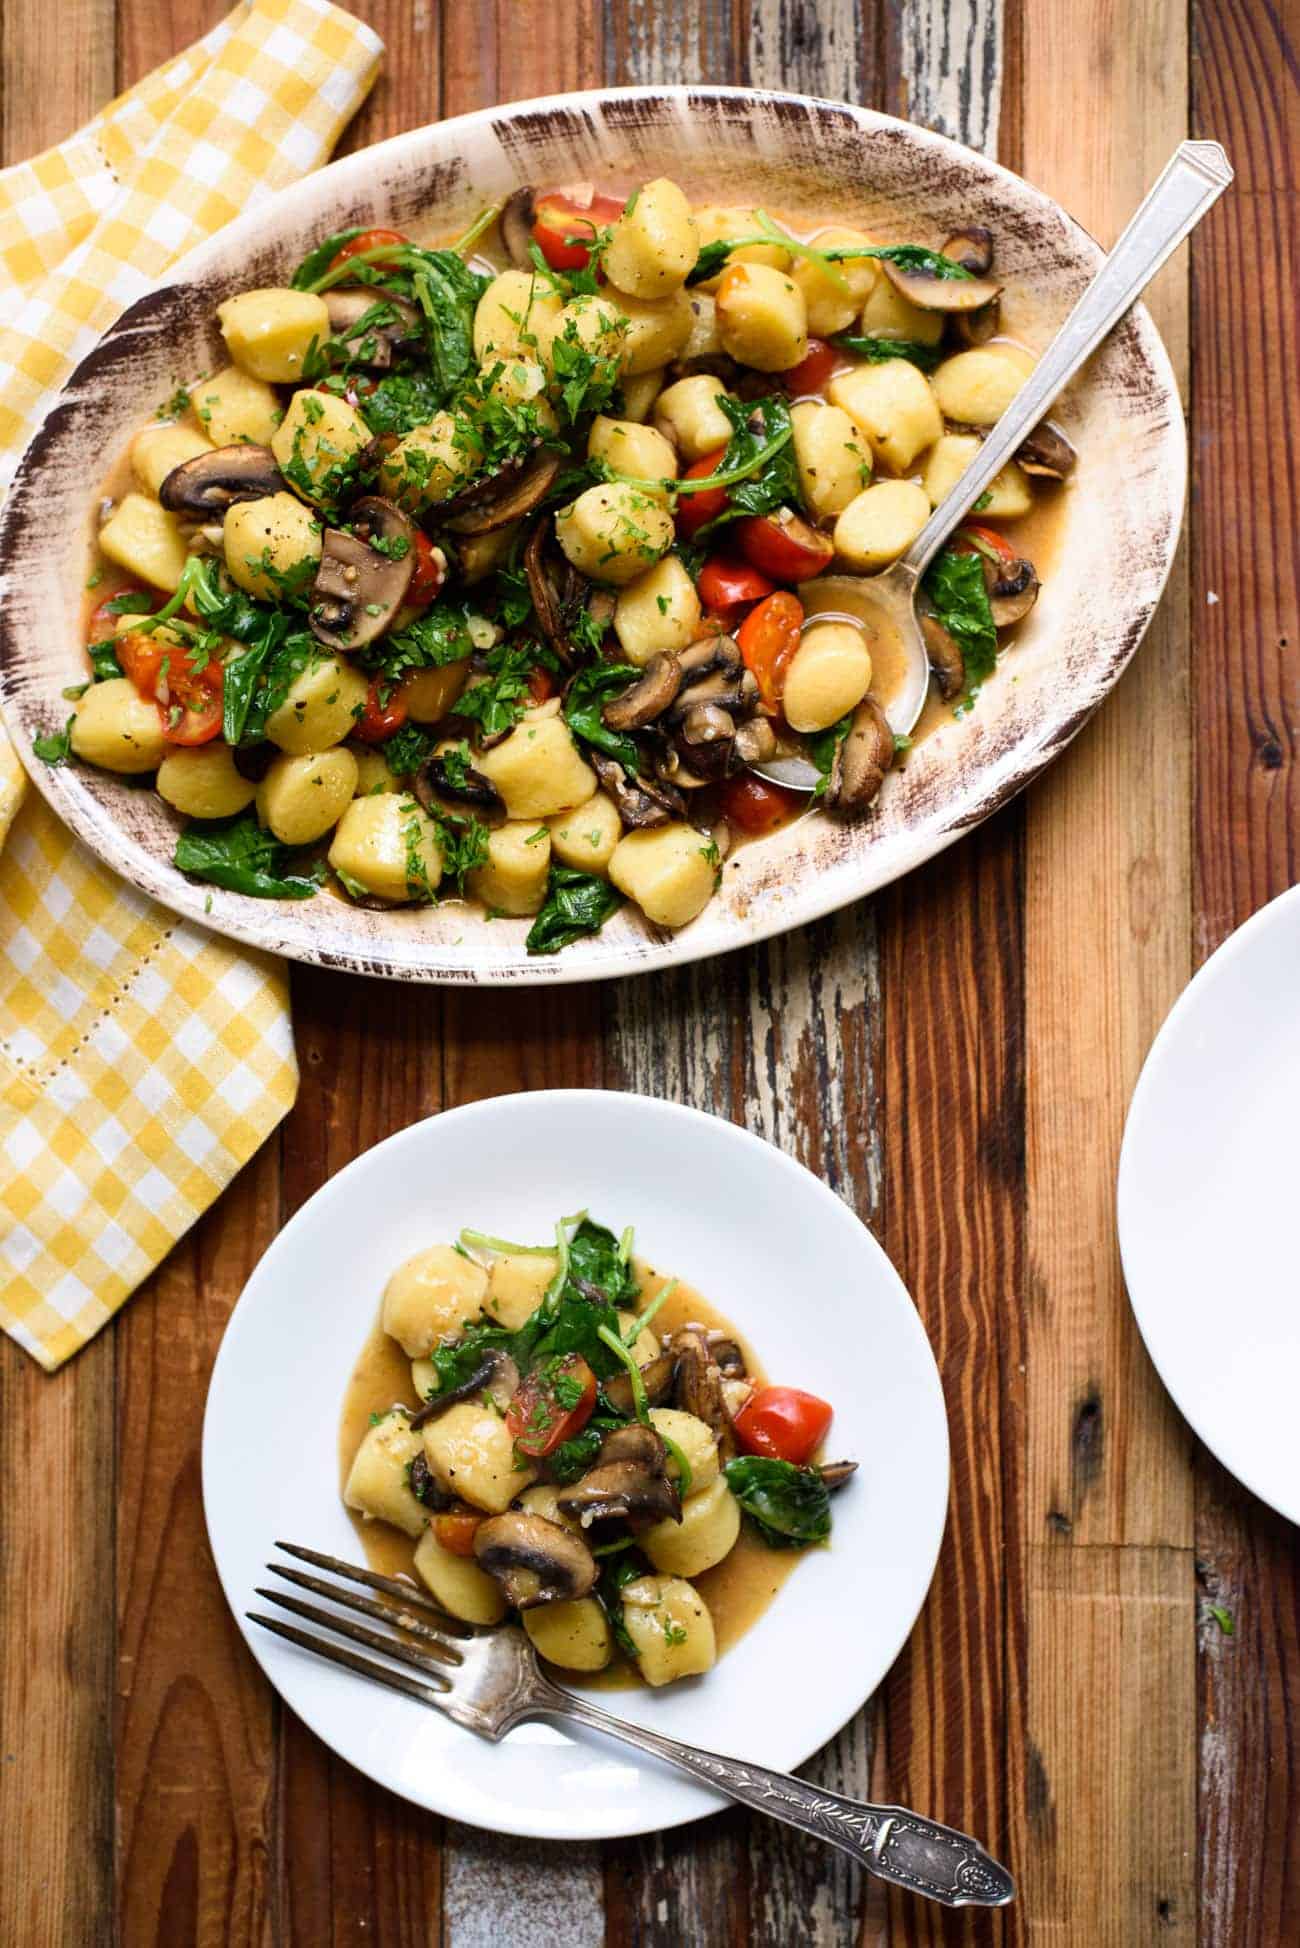 Gnocchi with mushrooms and tomatoes served on a wooden table.